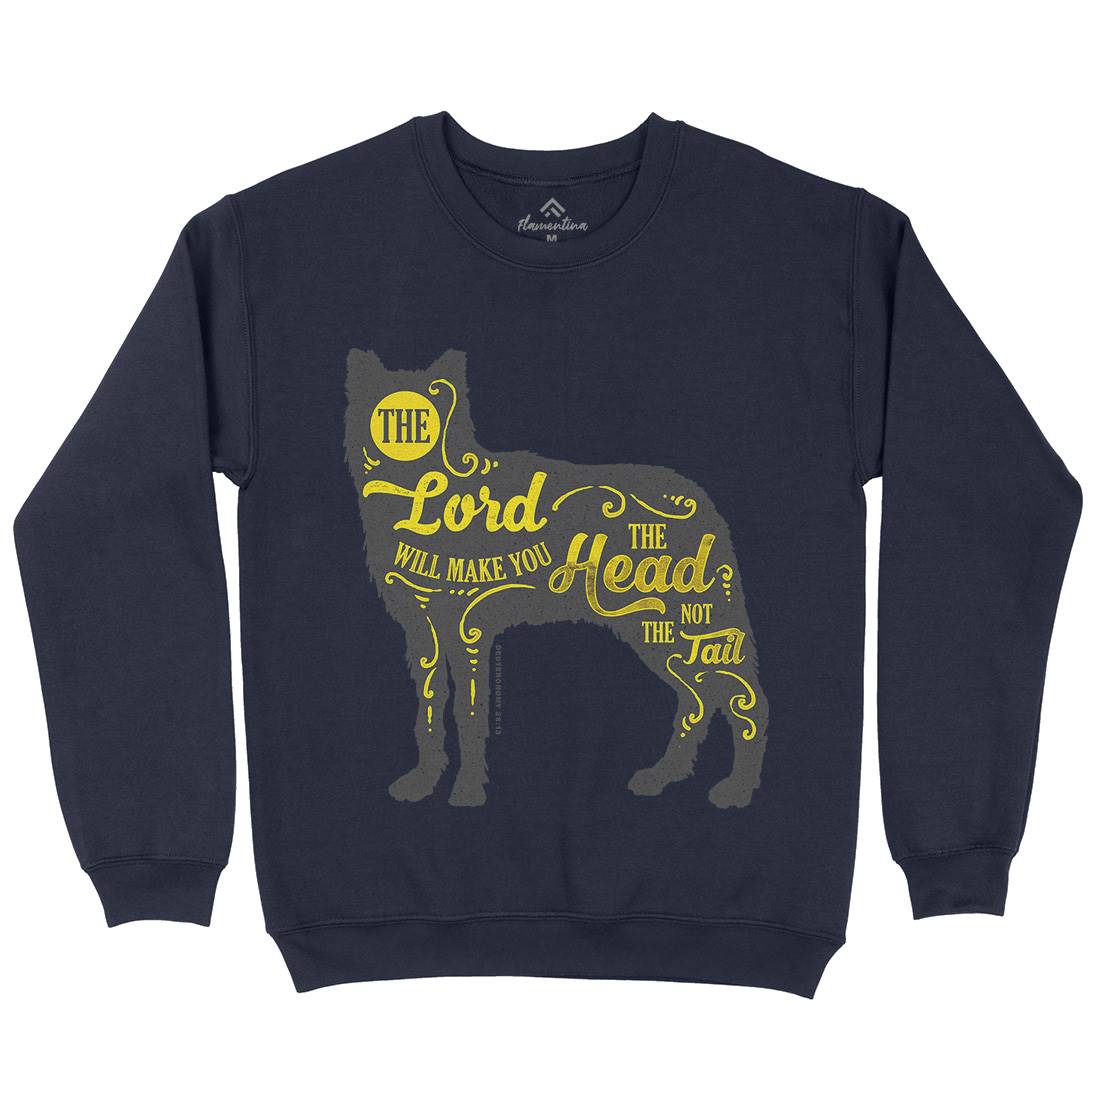 Head Not The Tail Mens Crew Neck Sweatshirt Religion A326